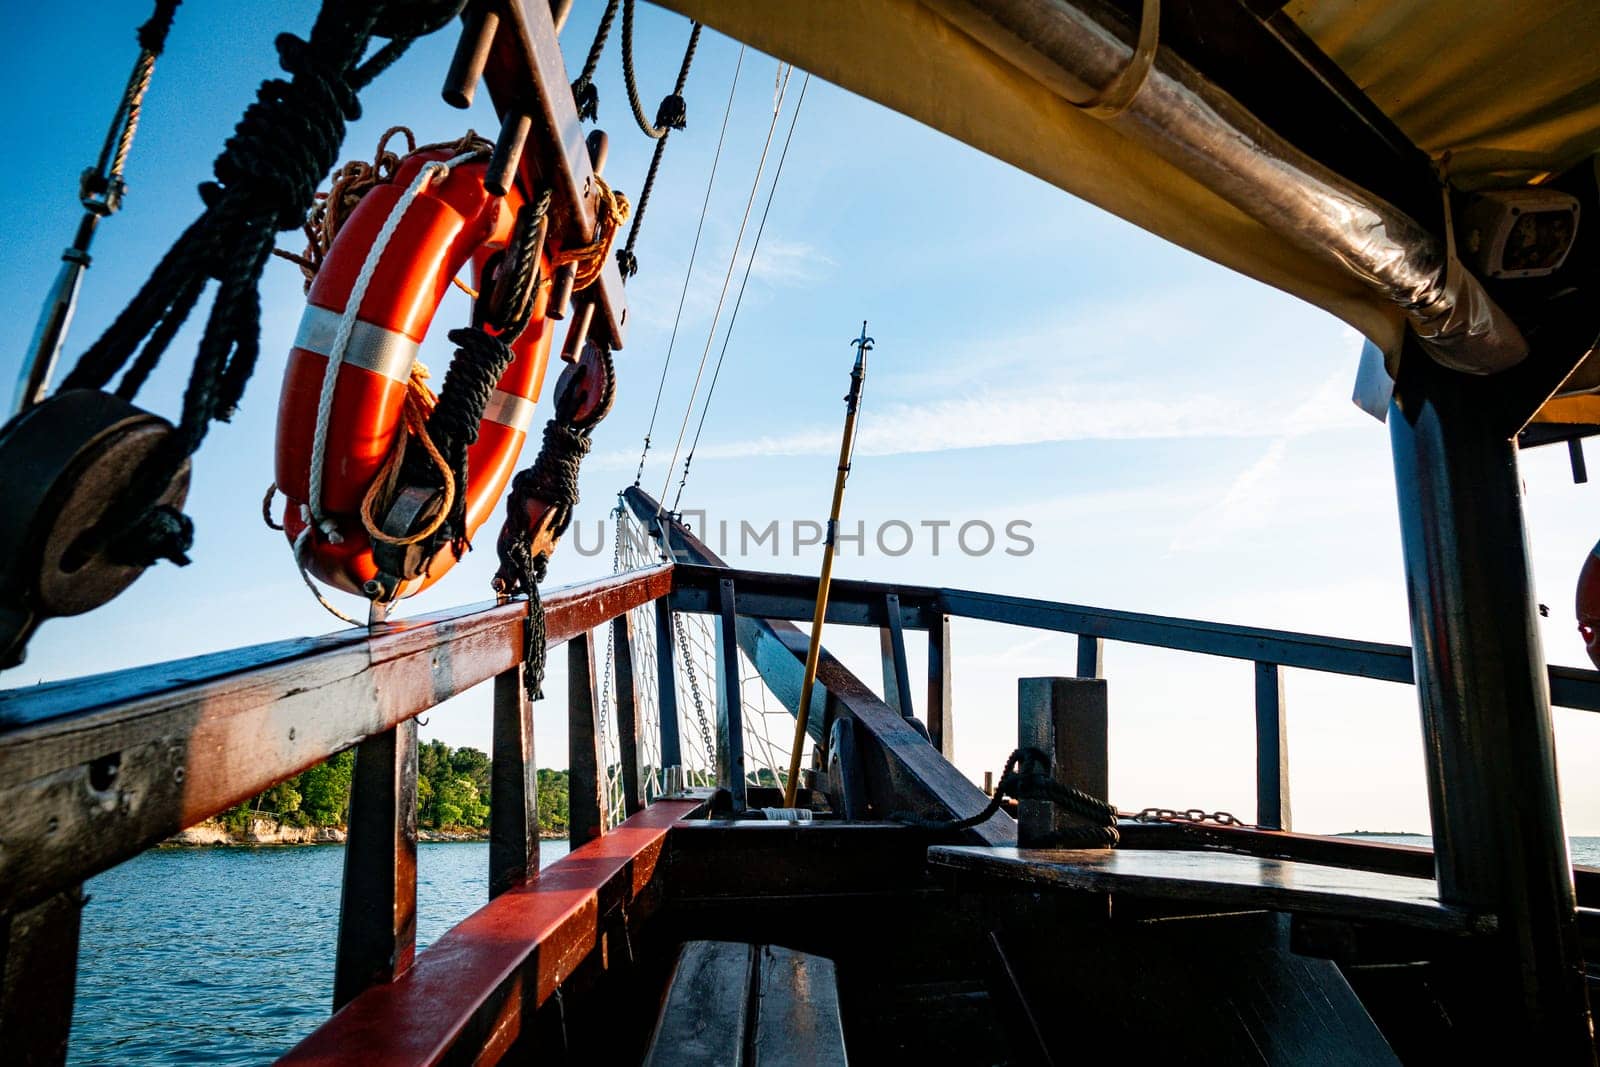 a beautiful old wooden boat with fishing nets and red lifebuoys with a tropical island in the background